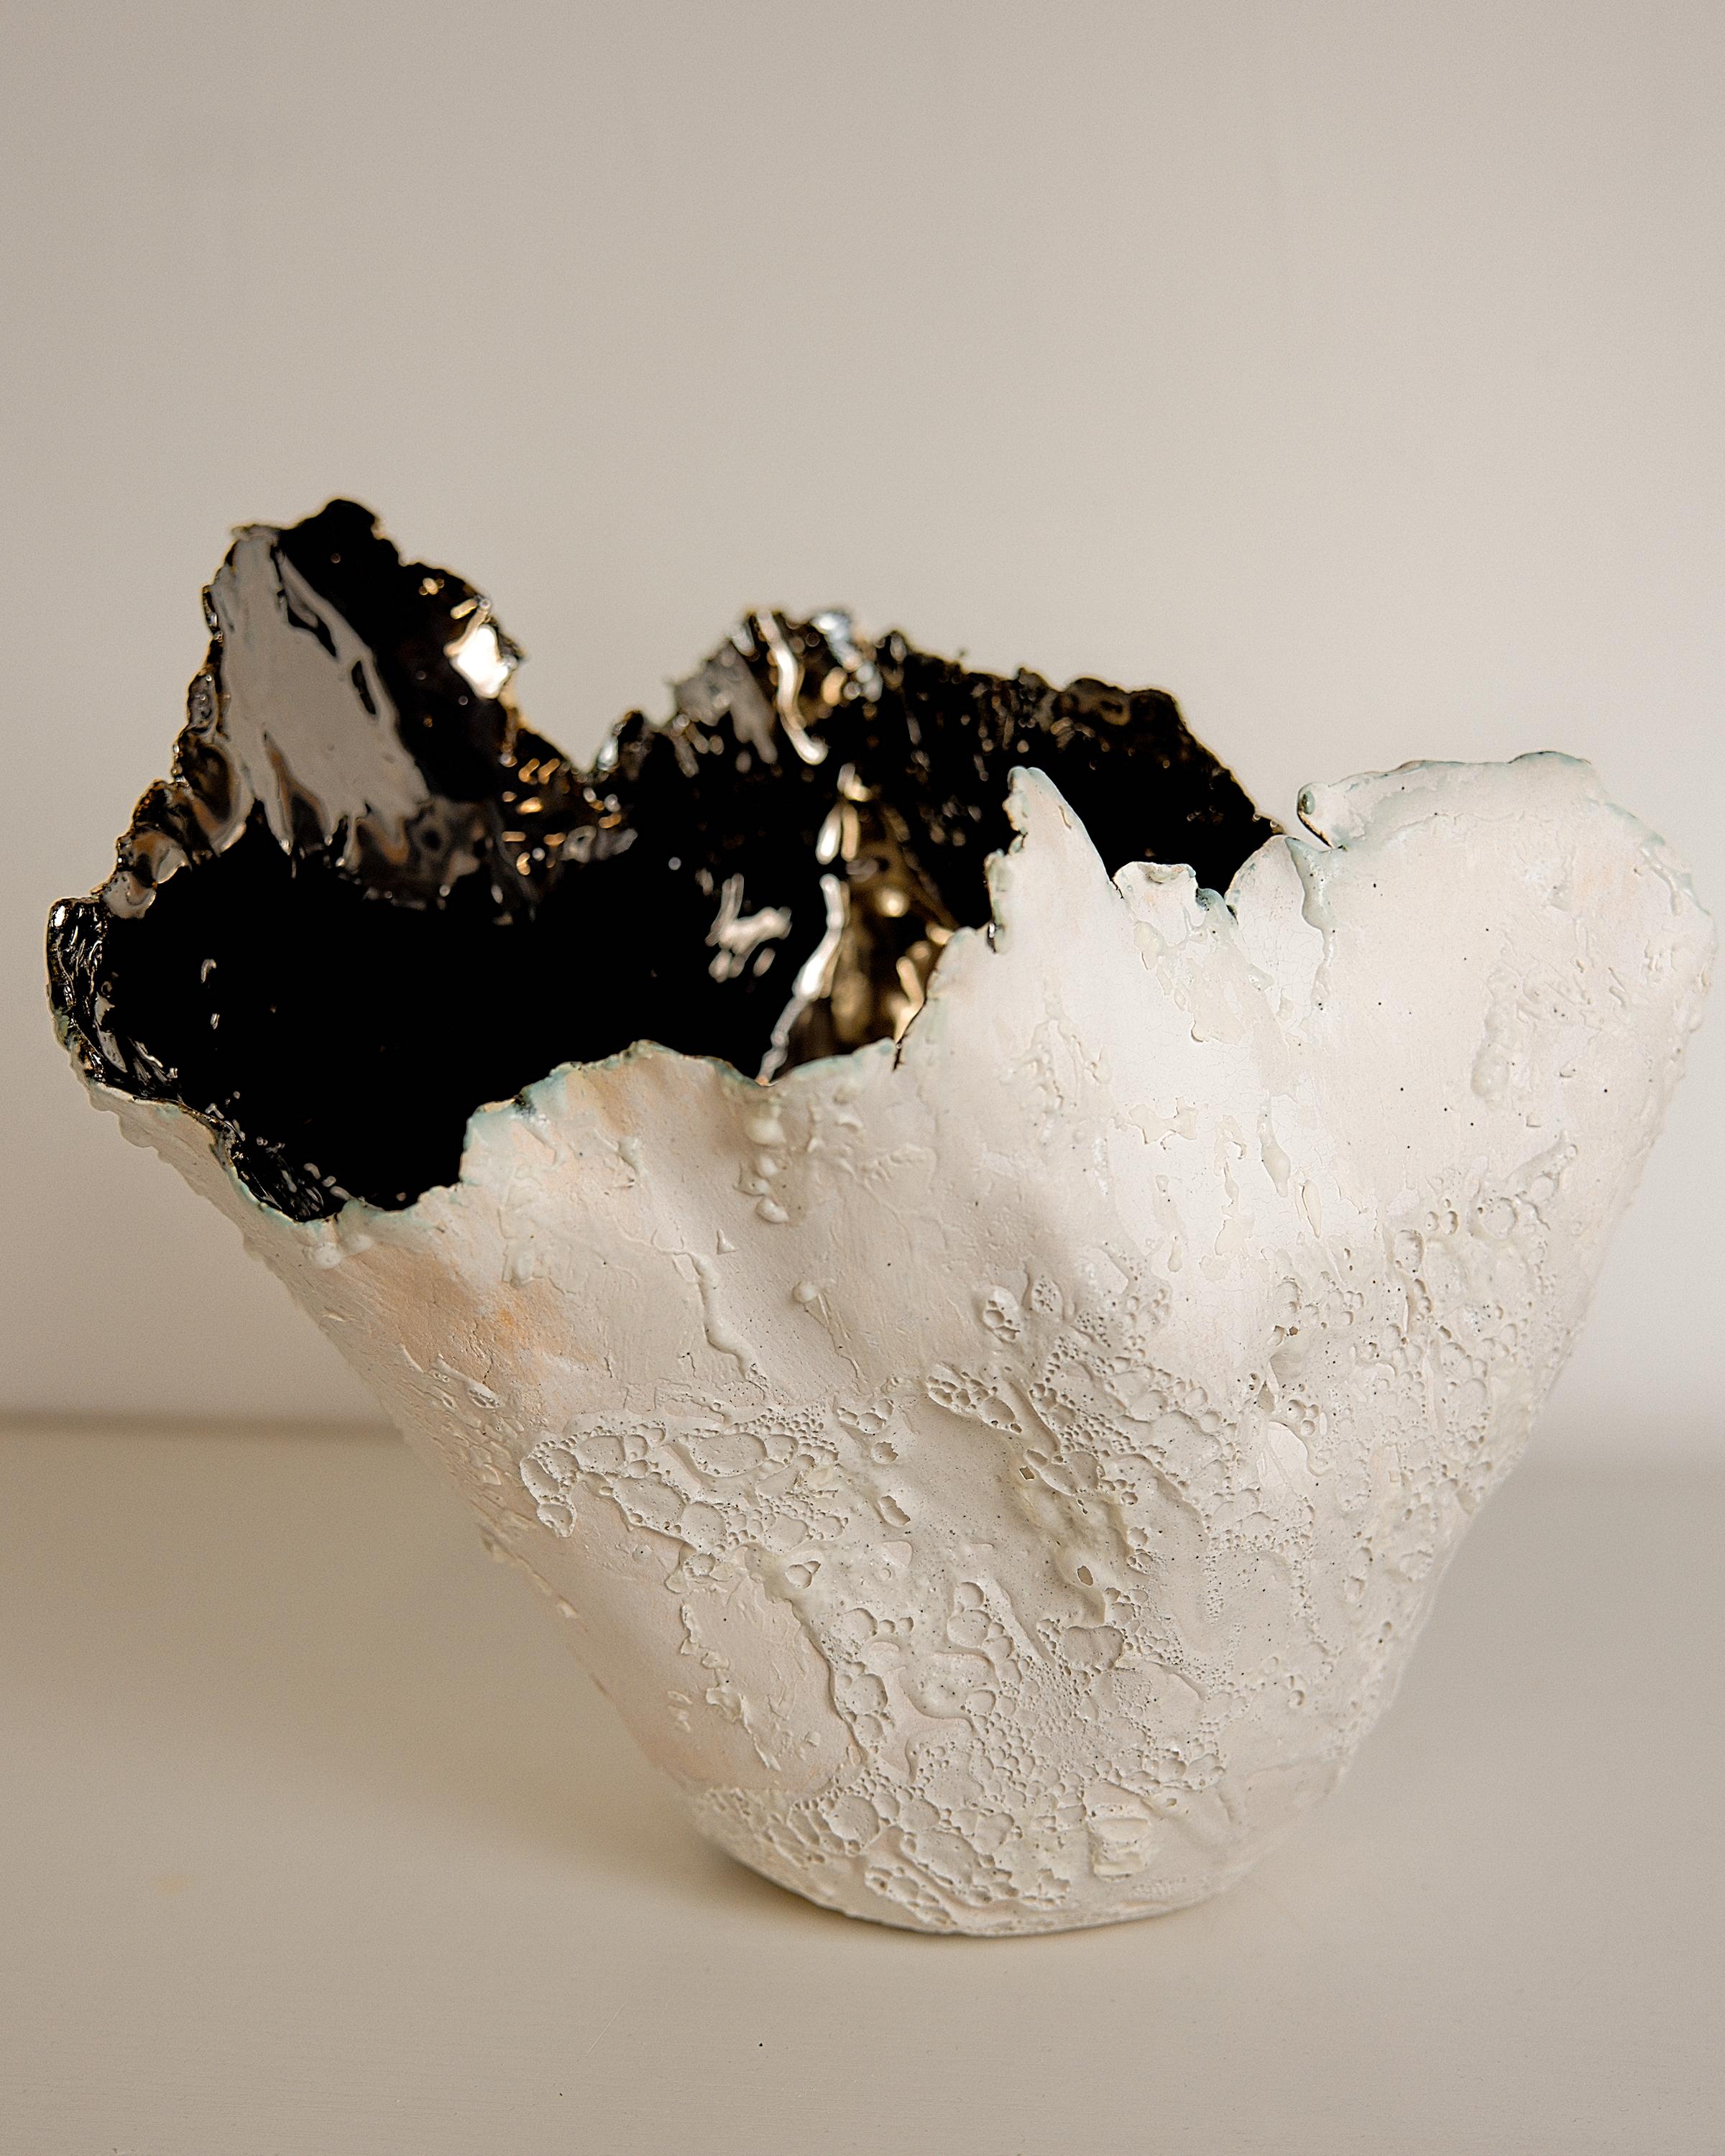 Bring a touch of modern style to your home with our Drift Torn Edge Vases
one of kind 
this White open  jar with Textured drips and lava glaze
one of a kind
Mirror glazed inside. one of a kind 

., each striking vase features a unique, moon-like